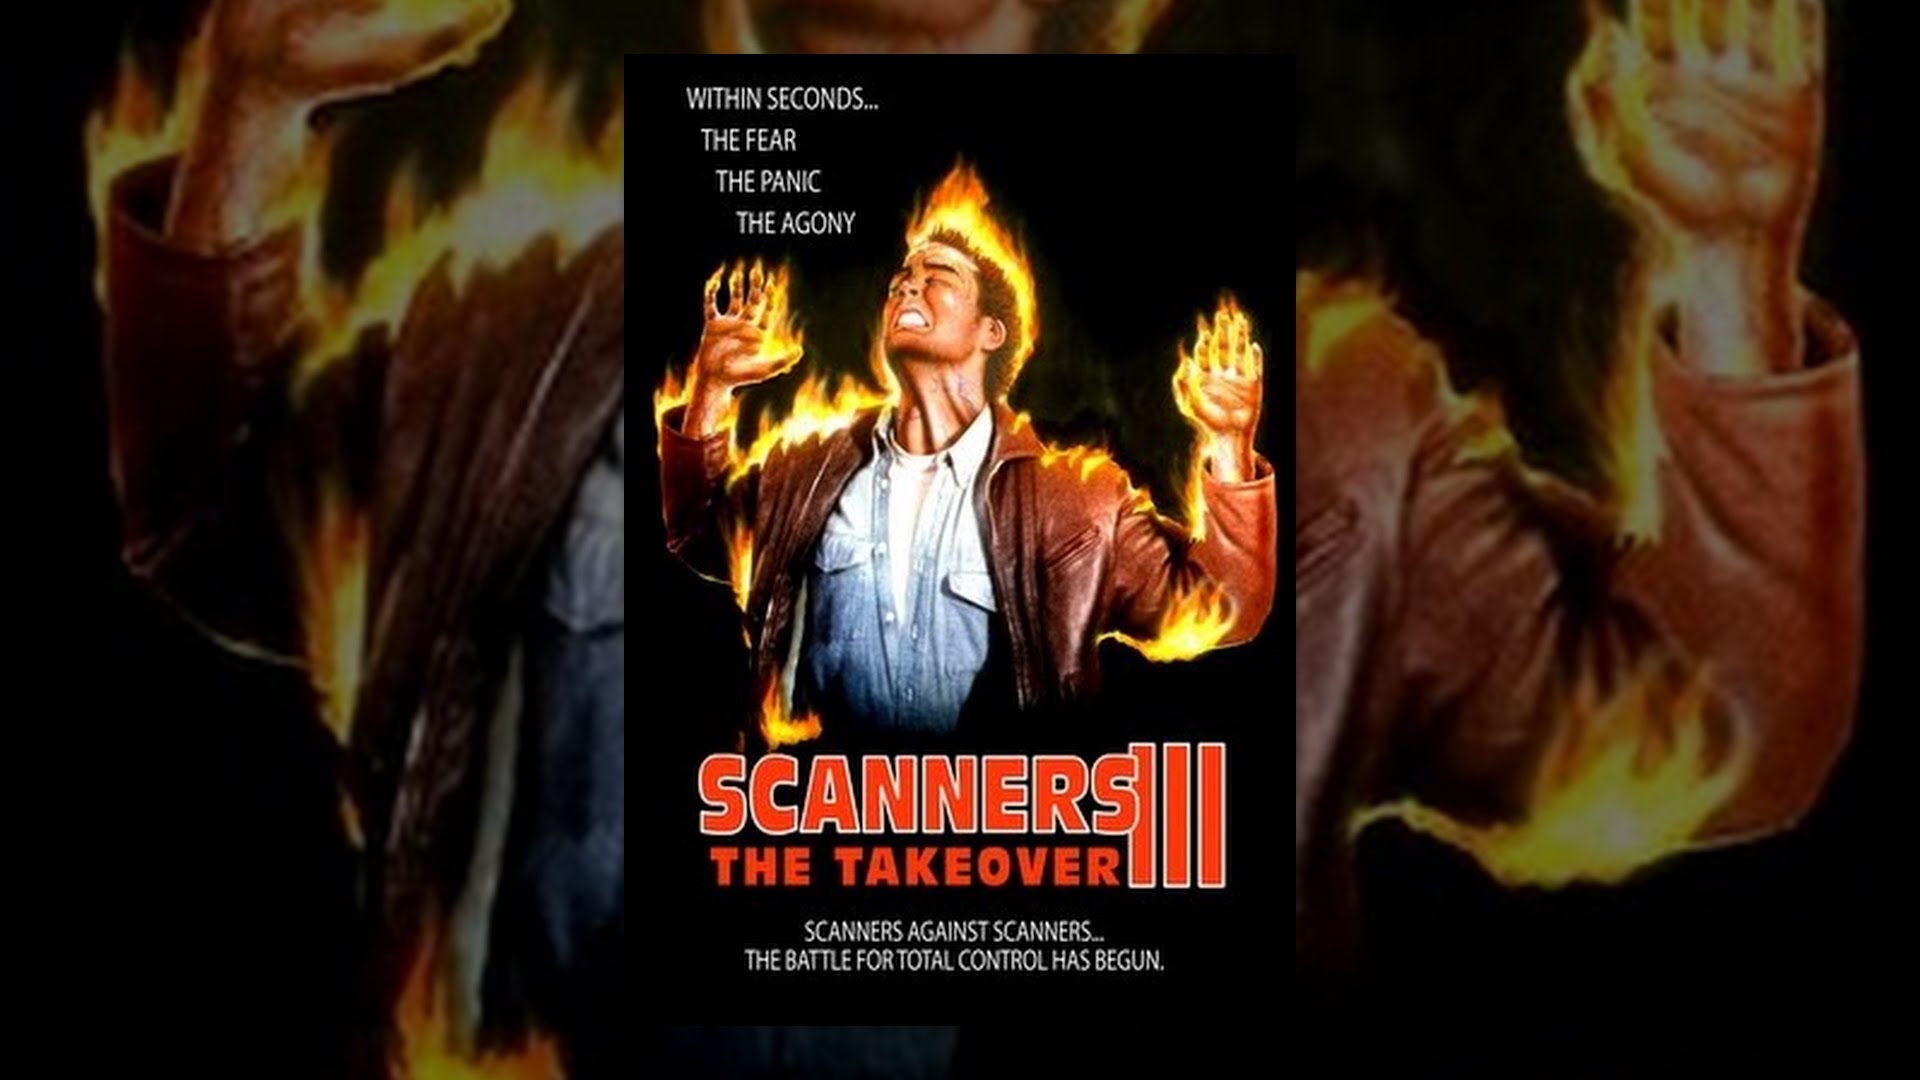 Download Scanners III: The Takeover